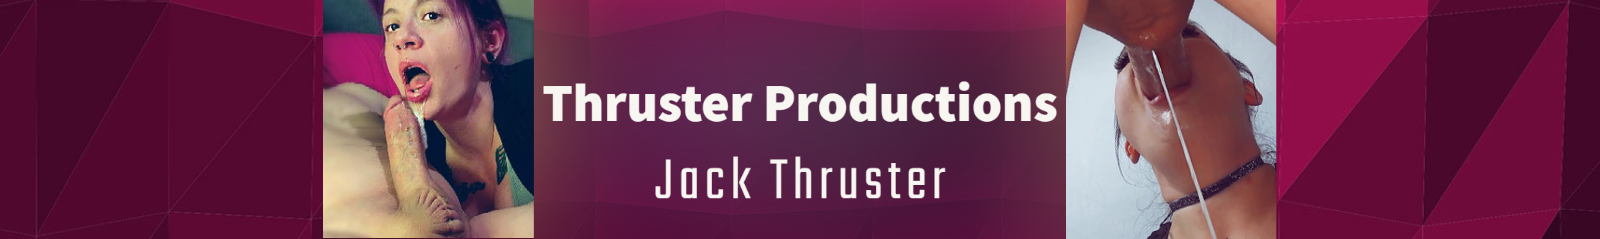 Thruster Productions